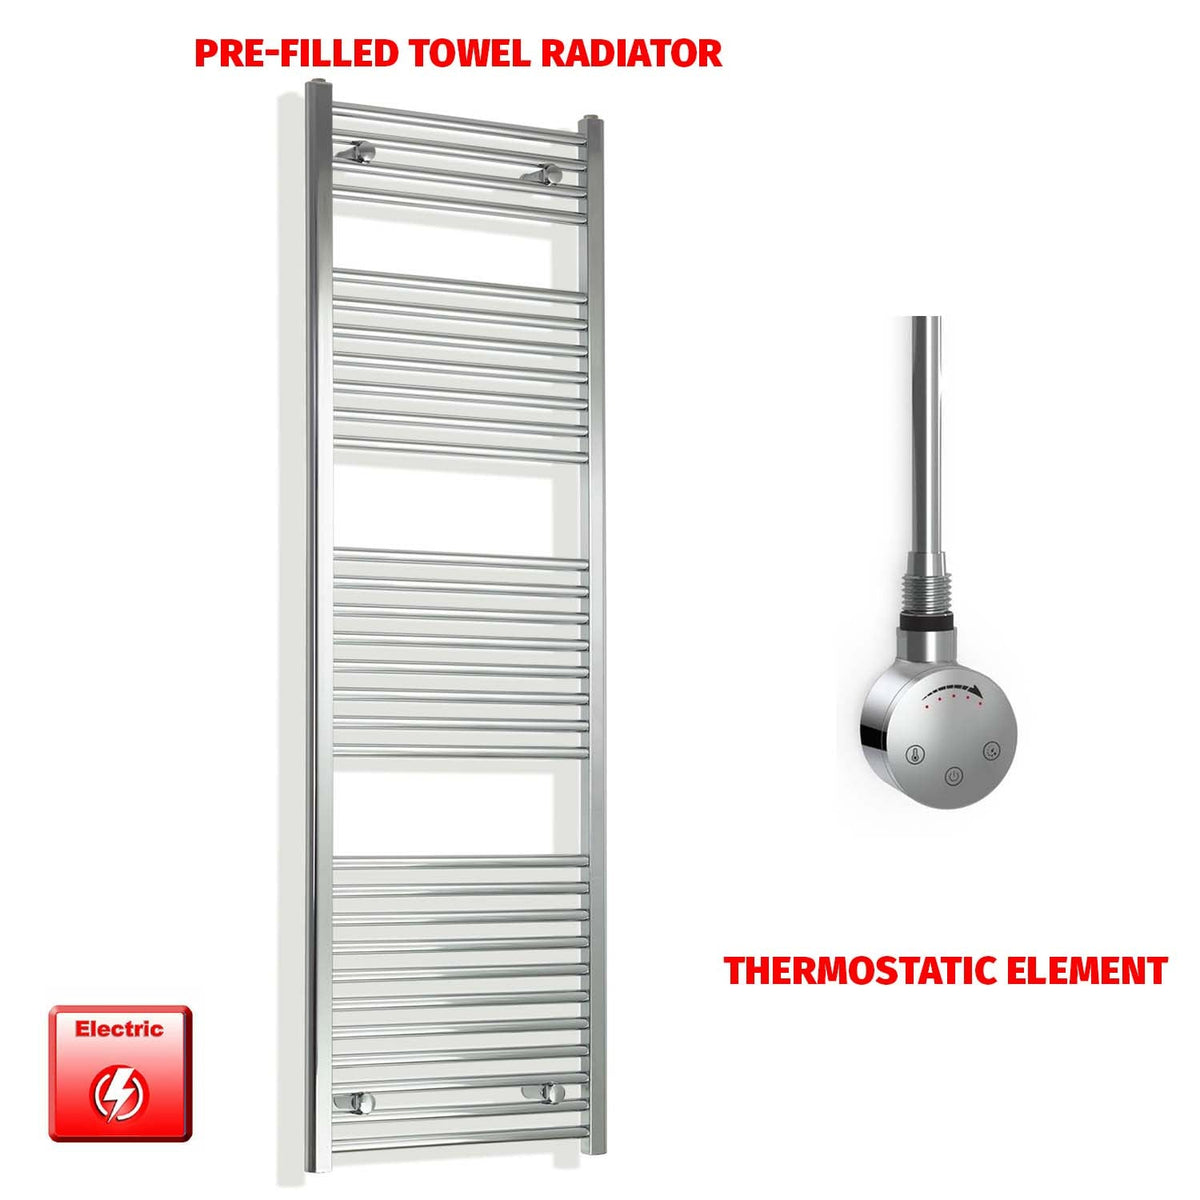 1700mm High 550mm Wide Pre-Filled Electric Heated Towel Radiator Chrome HTR Smart Element No Timer